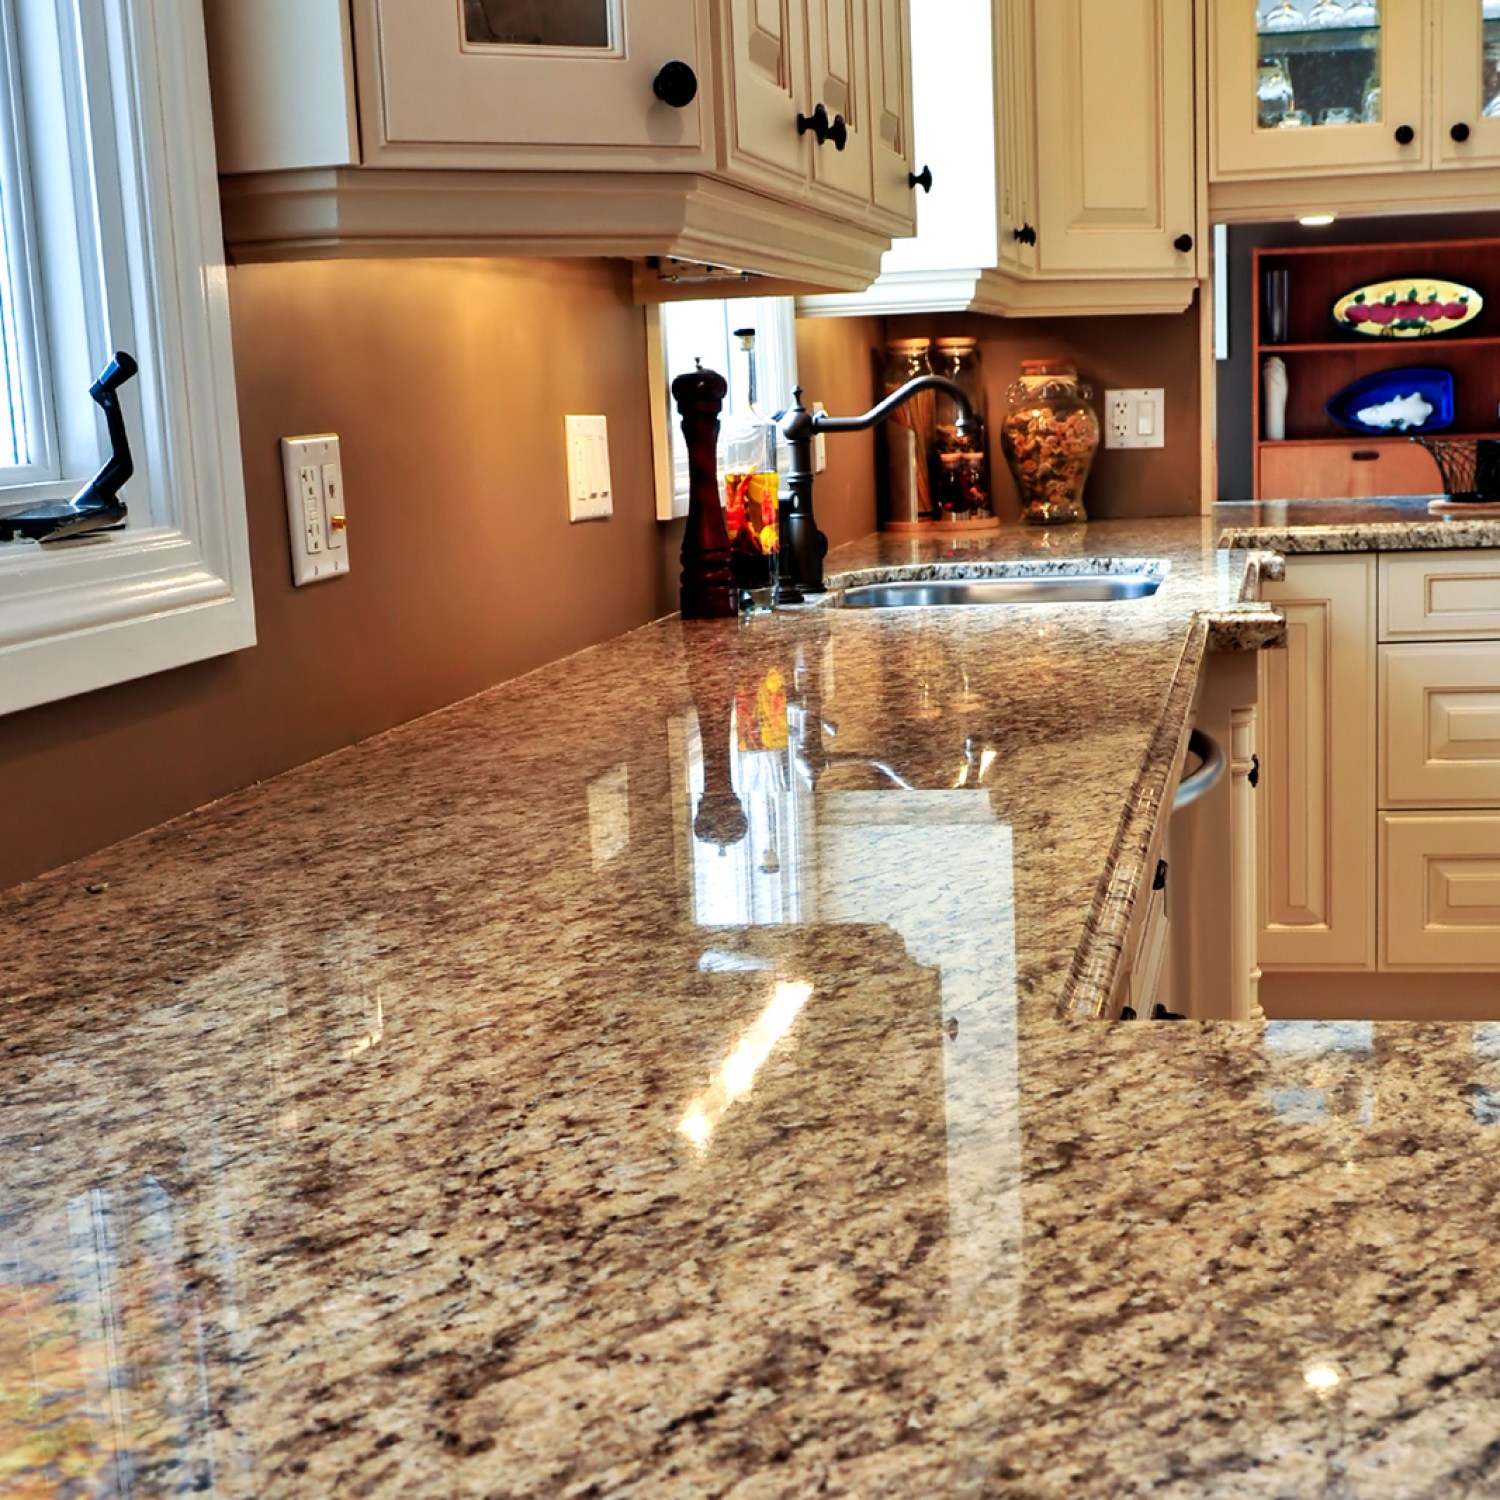 Repair Kitchen Countertop Scratches, How To Repair Corian Countertop Scratches